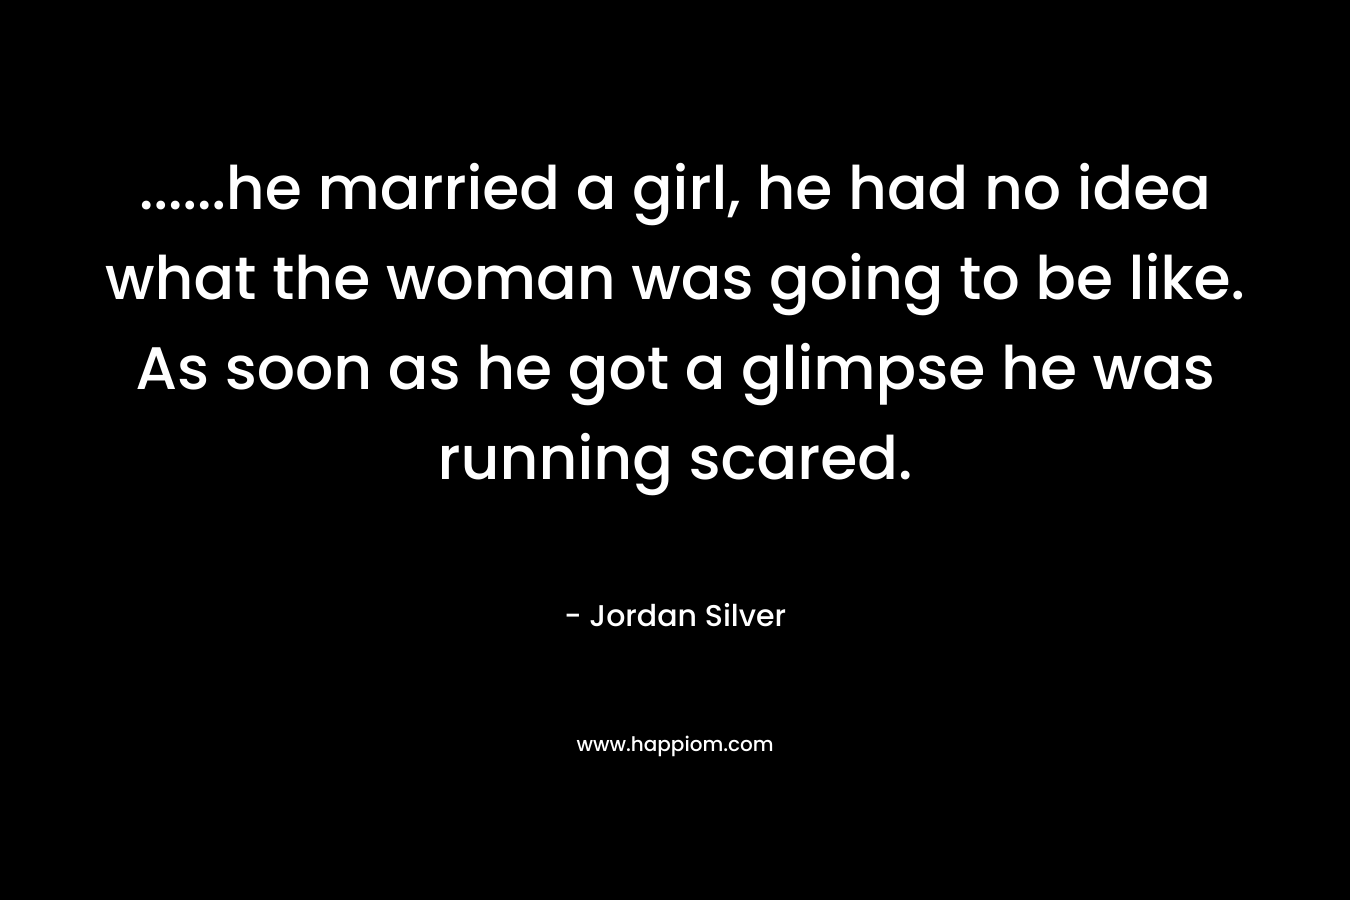 ……he married a girl, he had no idea what the woman was going to be like. As soon as he got a glimpse he was running scared. – Jordan Silver